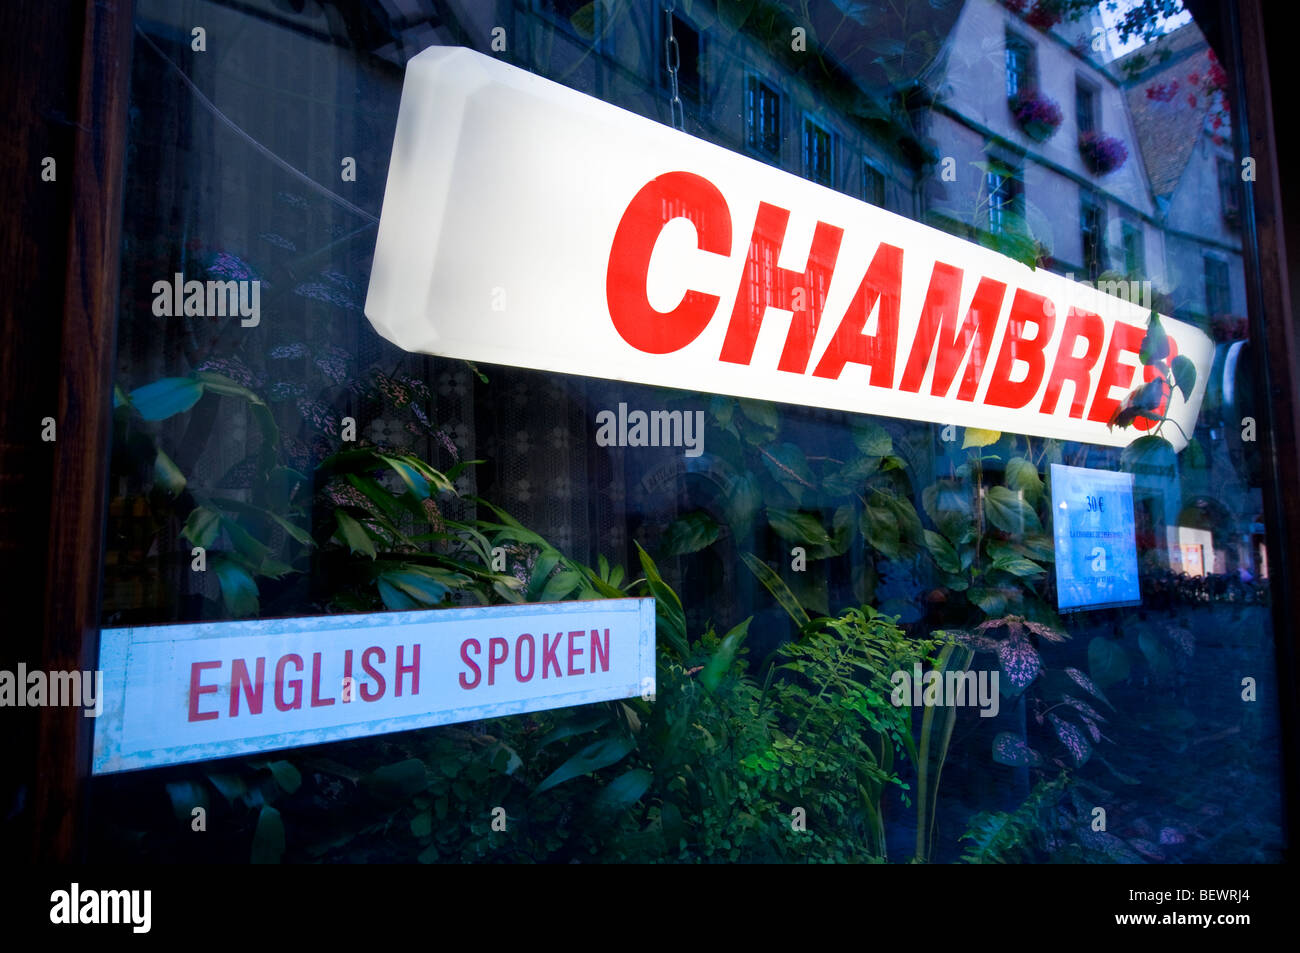 Illuminated red 'Chambres' sign in french B+B window with English spoken label Stock Photo